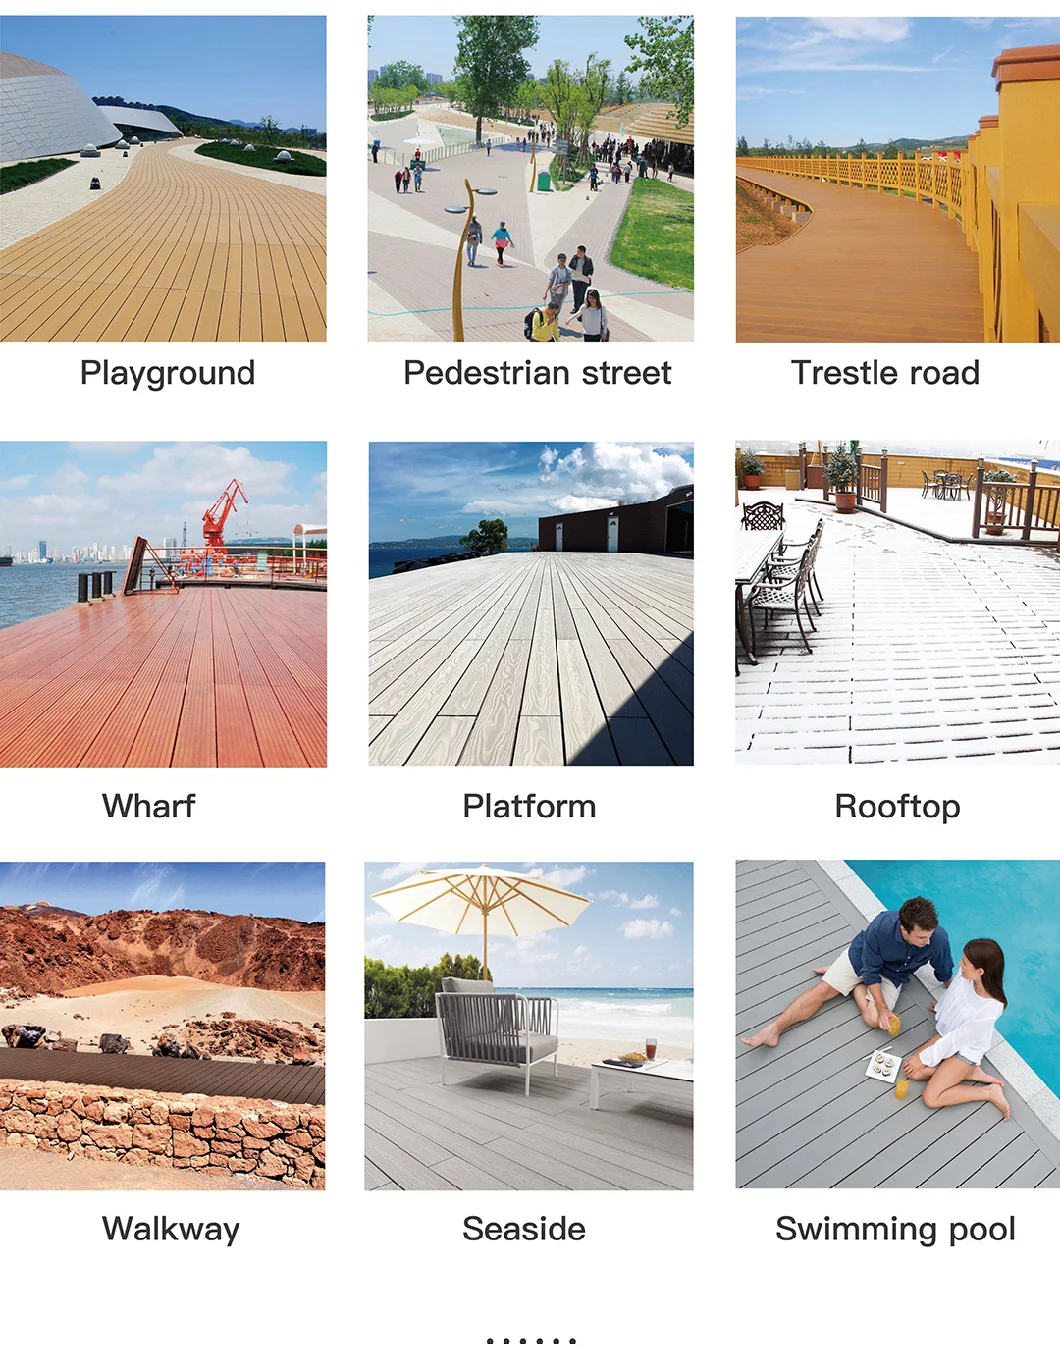 Waterproof Exterior WPC Co Extrusion Decking Flooring Co-04